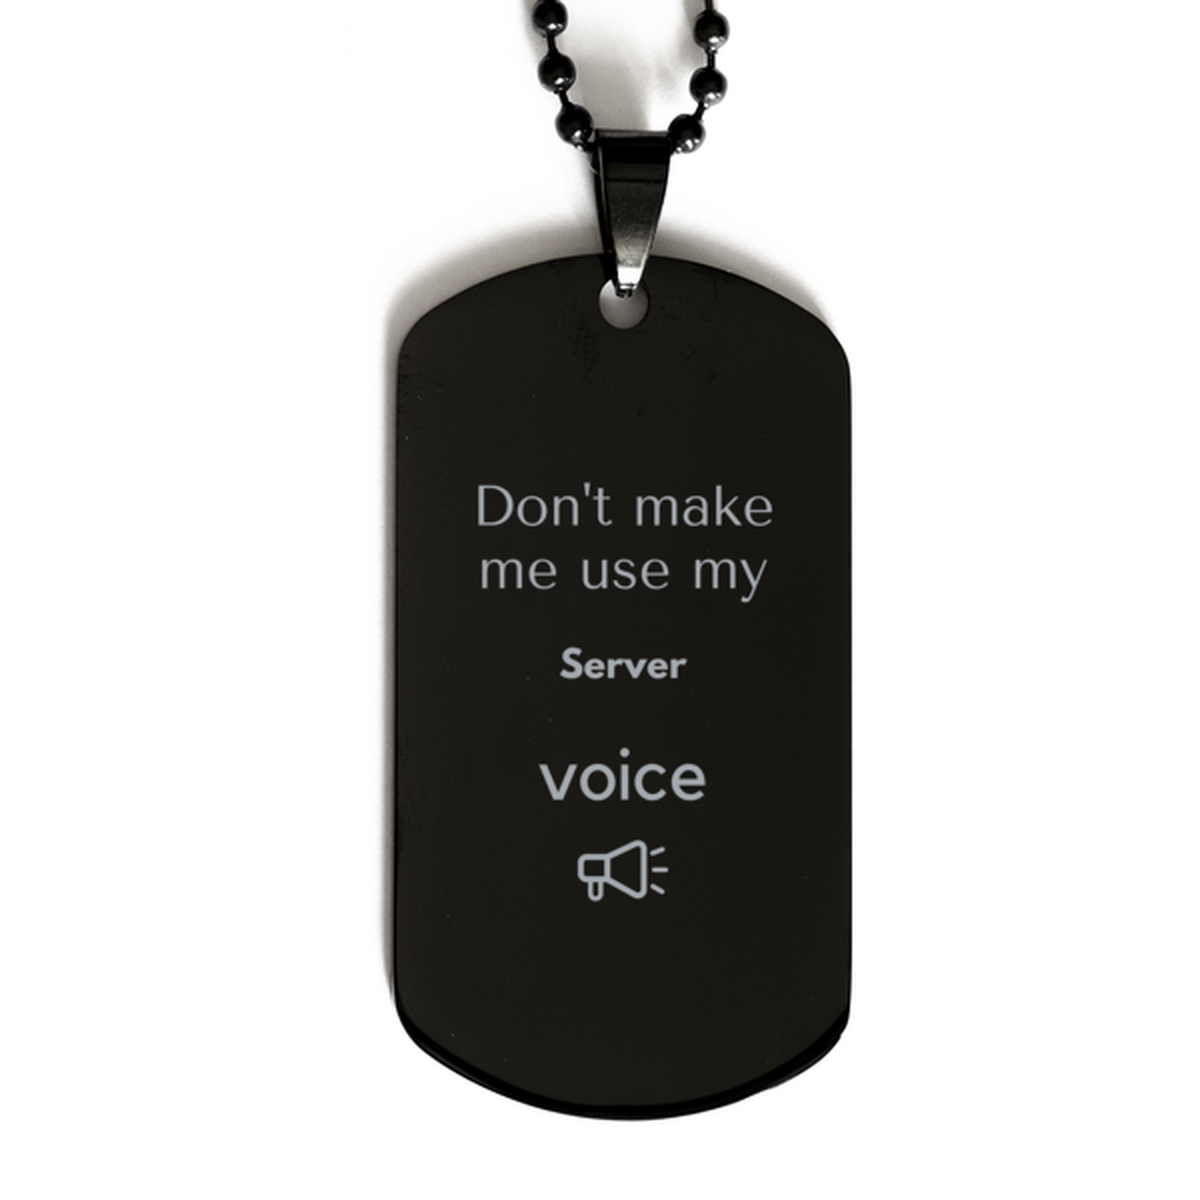 Don't make me use my Server voice, Sarcasm Server Gifts, Christmas Server Black Dog Tag Birthday Unique Gifts For Server Coworkers, Men, Women, Colleague, Friends